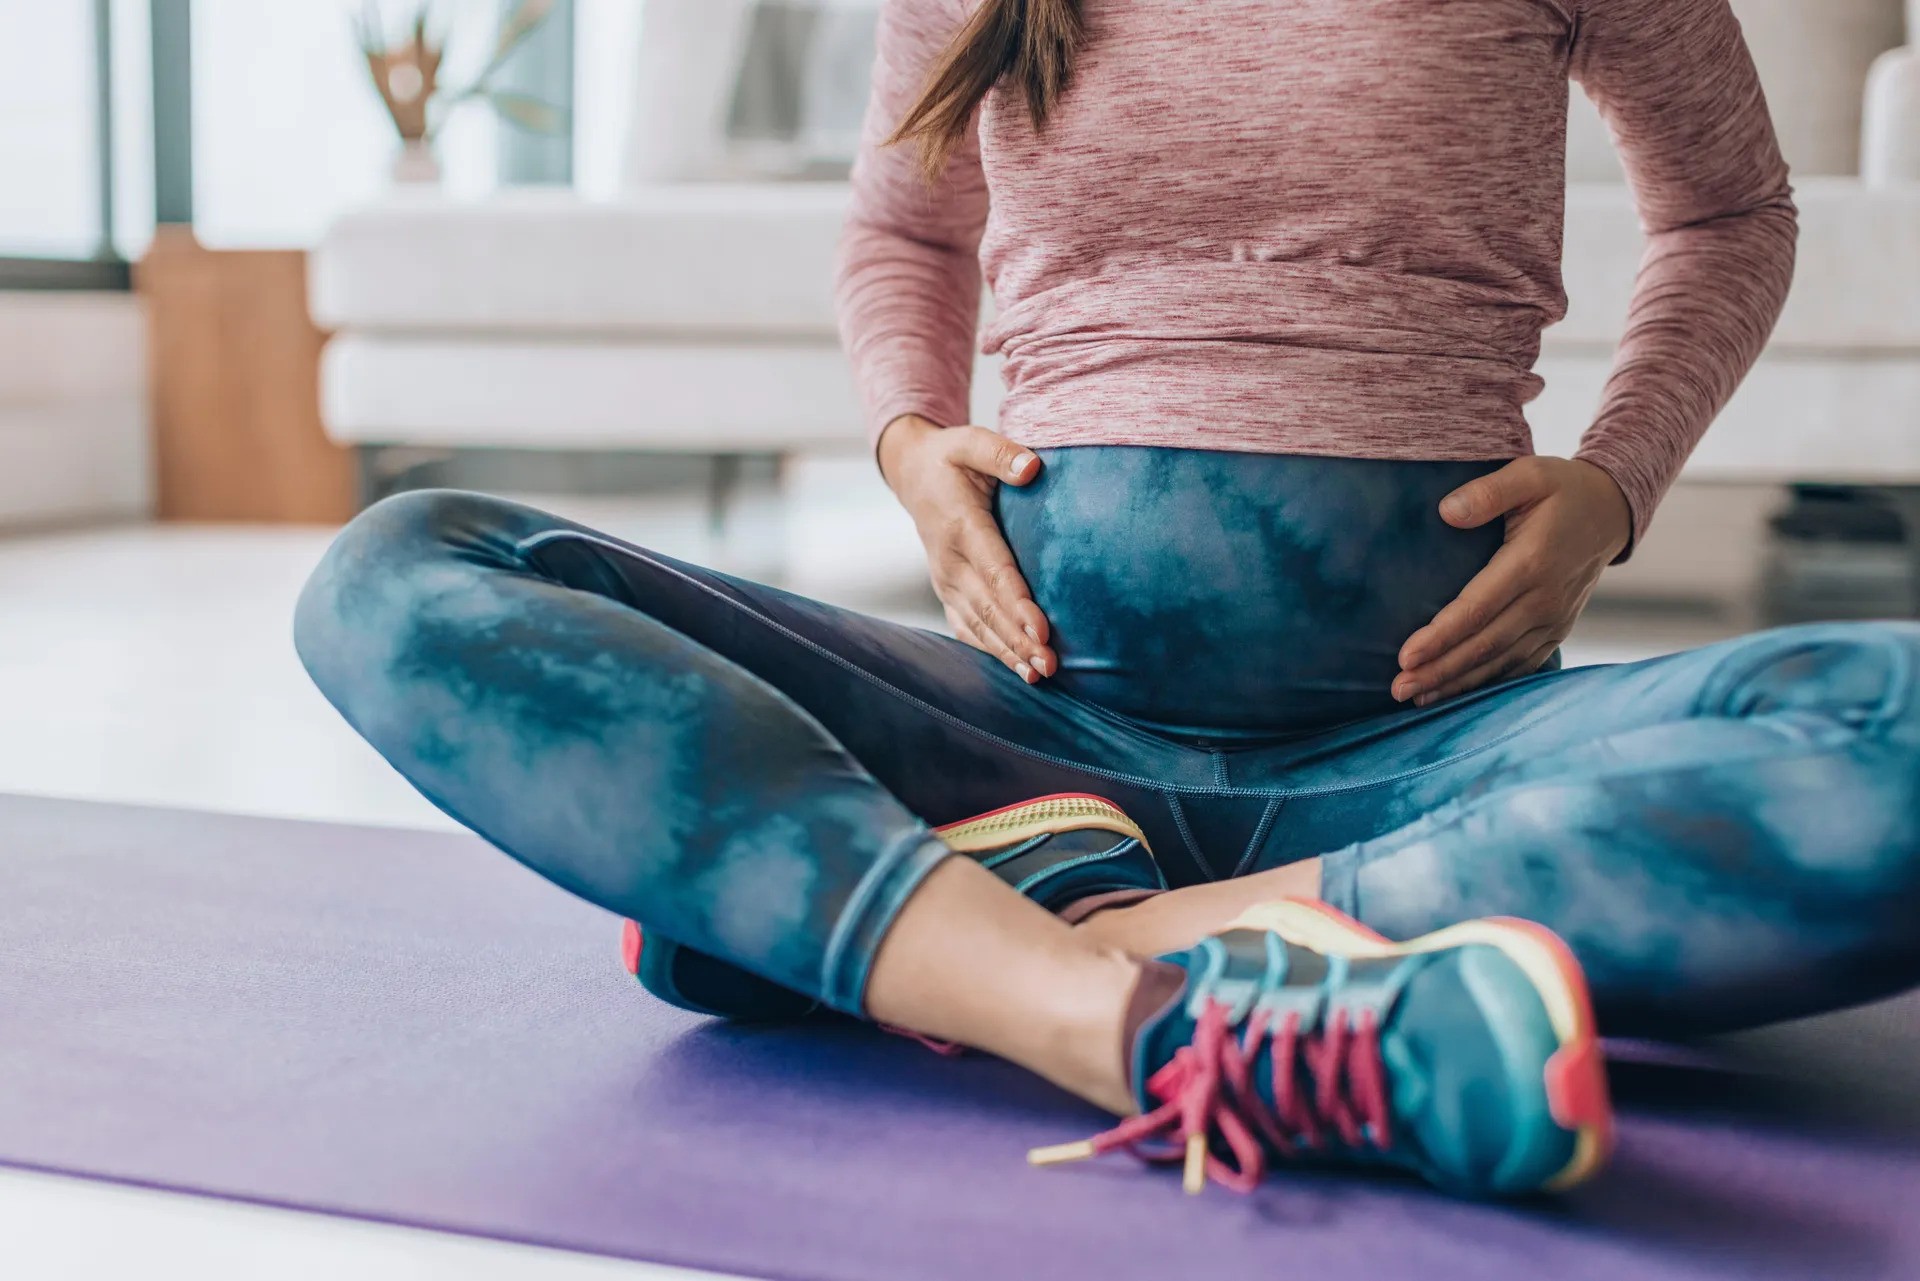 Pregnant woman holding her stomach on an exercise mat